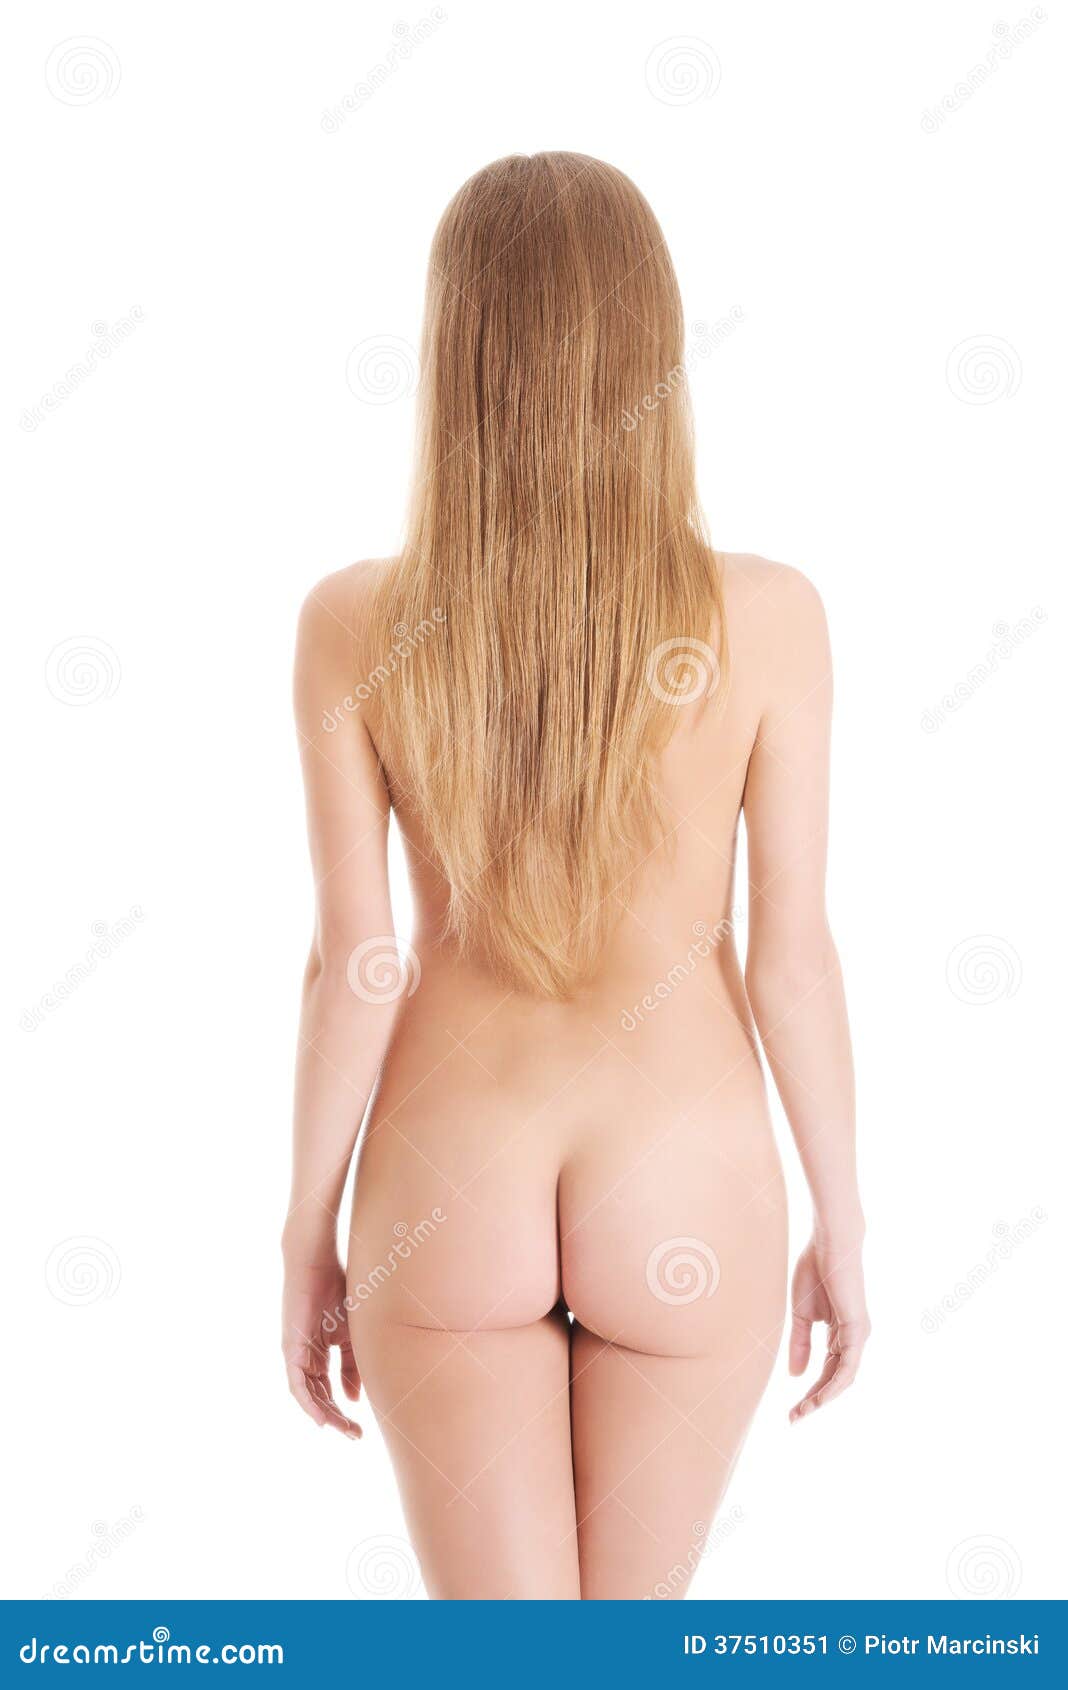 Naked women from back